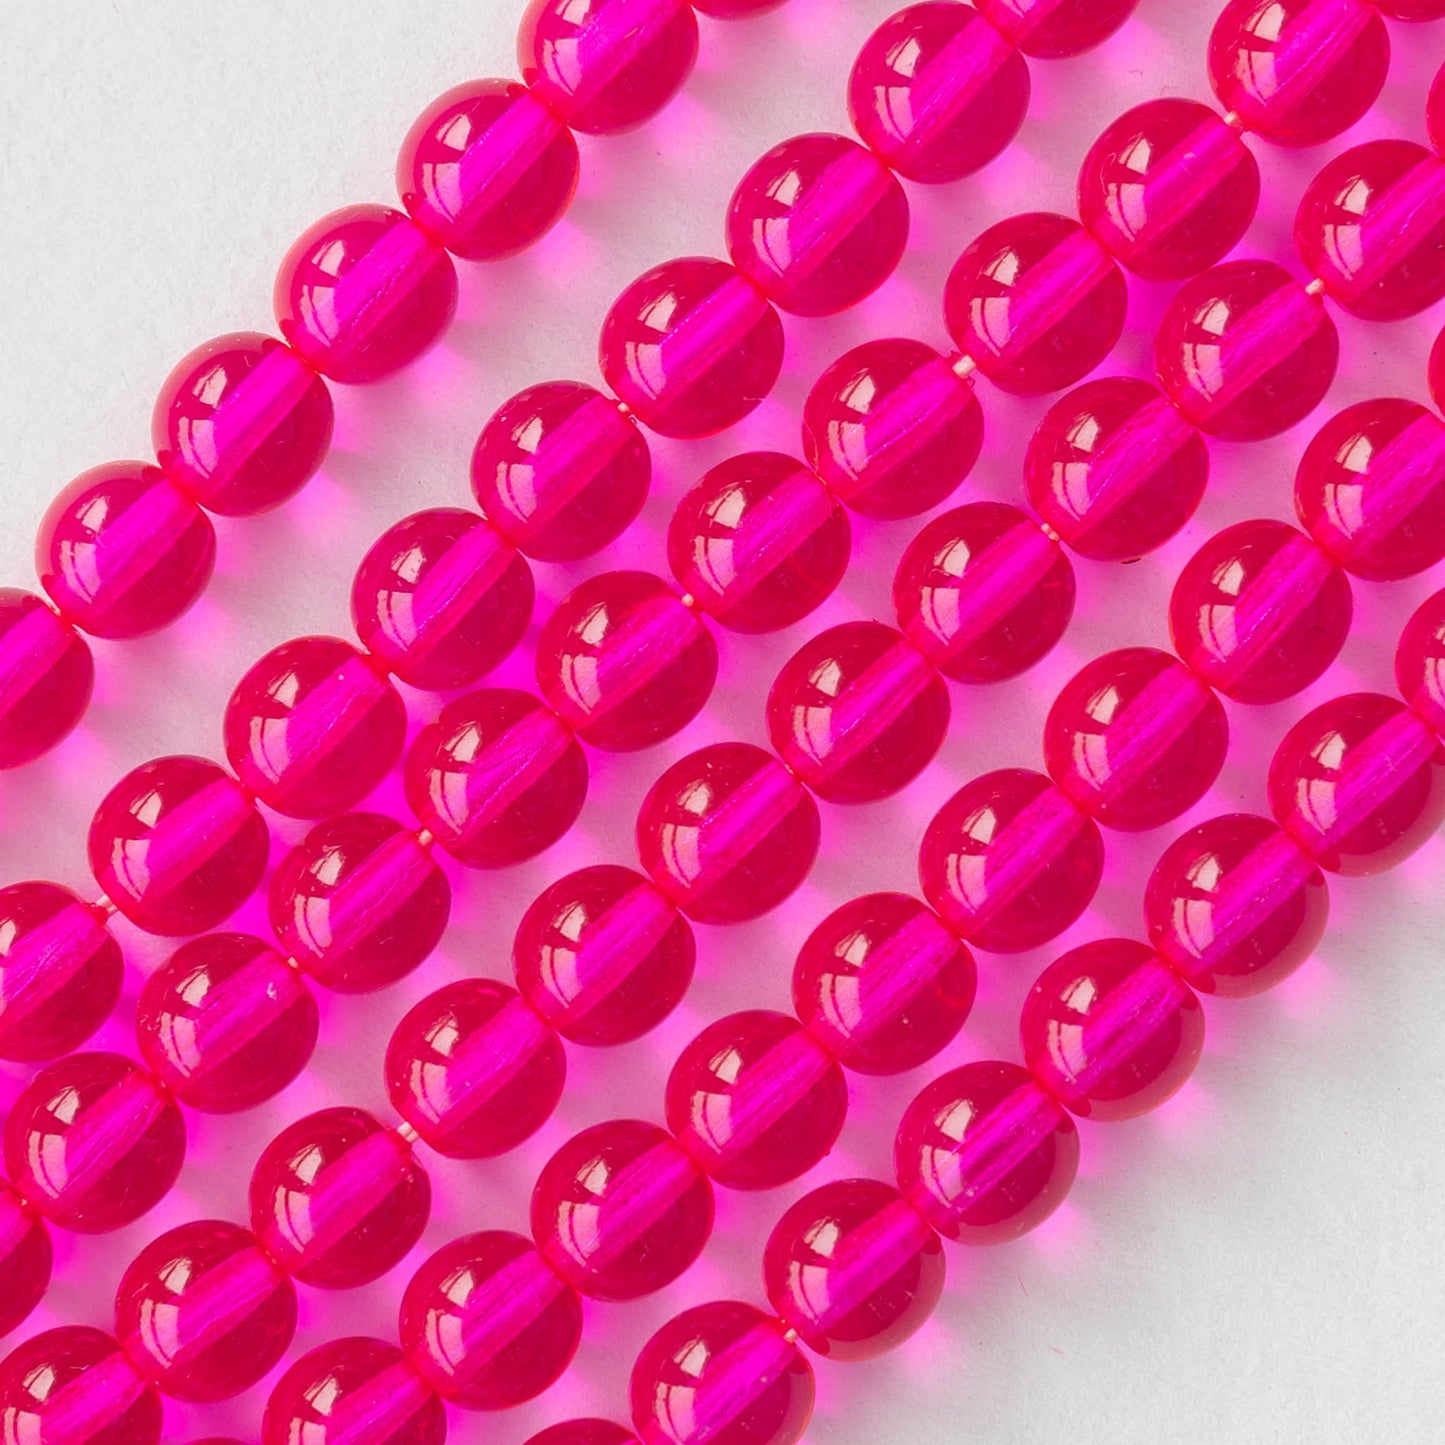 *50* 4mm Copper Etched Salmon Pink Round Druk Beads Czech Glass Beads by GR8BEADS - The Bead Obsession